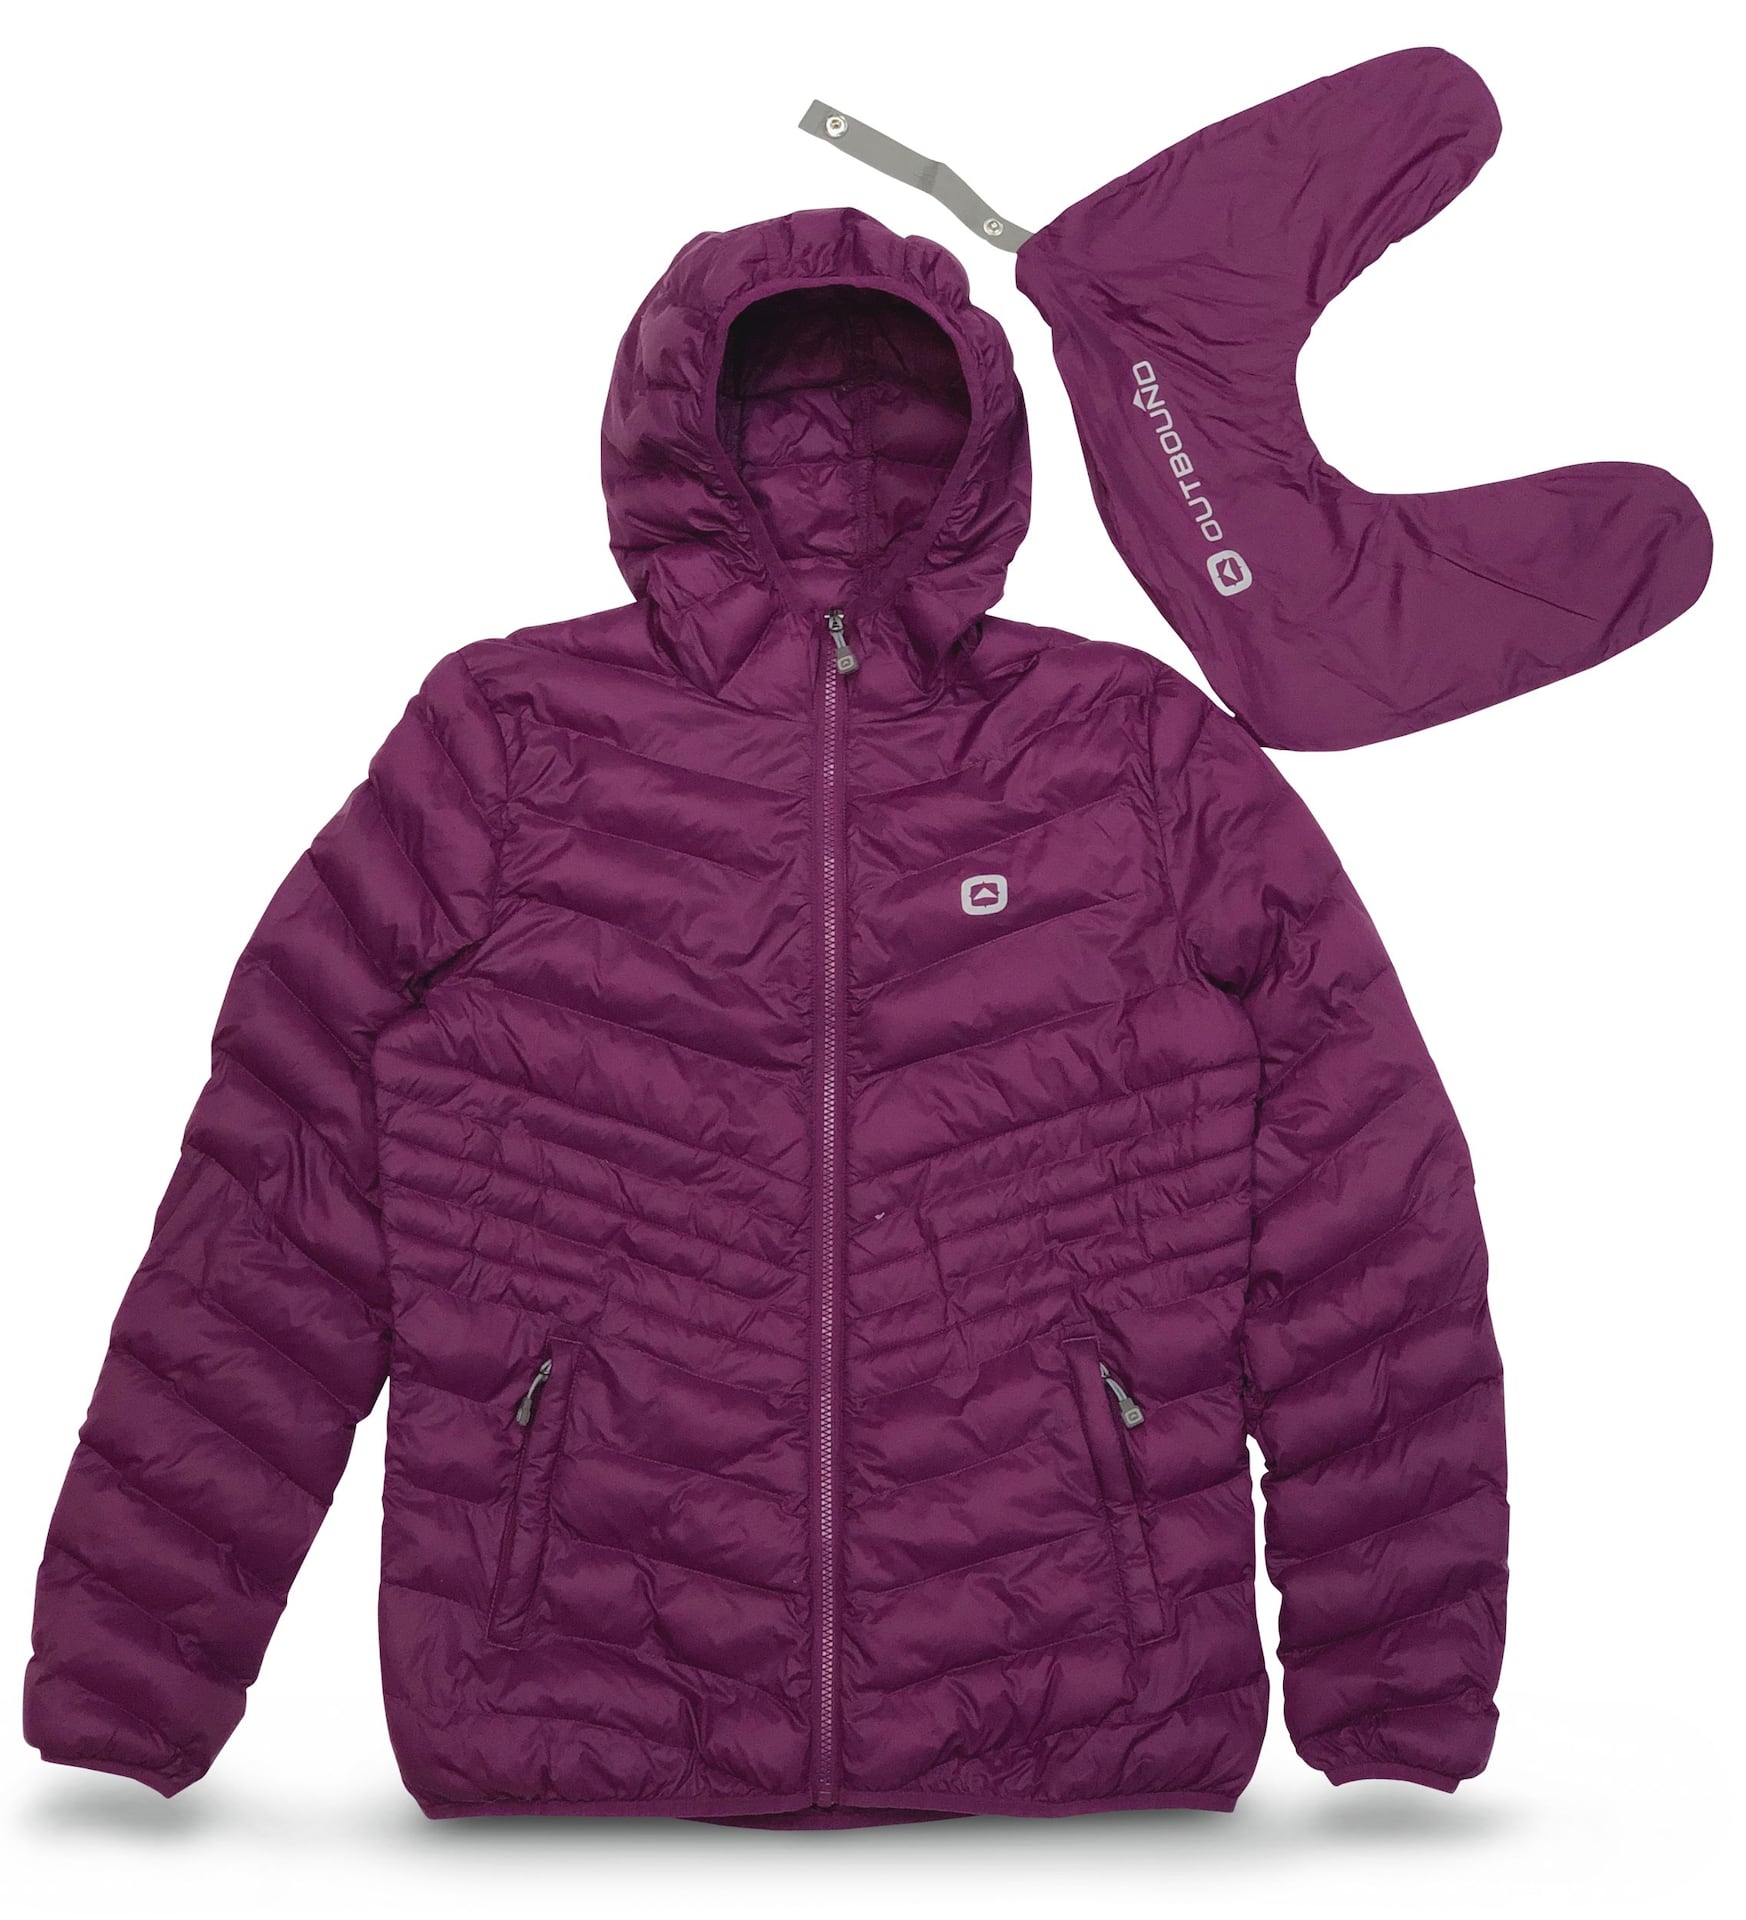 Outbound Women's Charlotte Packable Insulated Winter Puffer Jacket  Water-Resistant, Plum